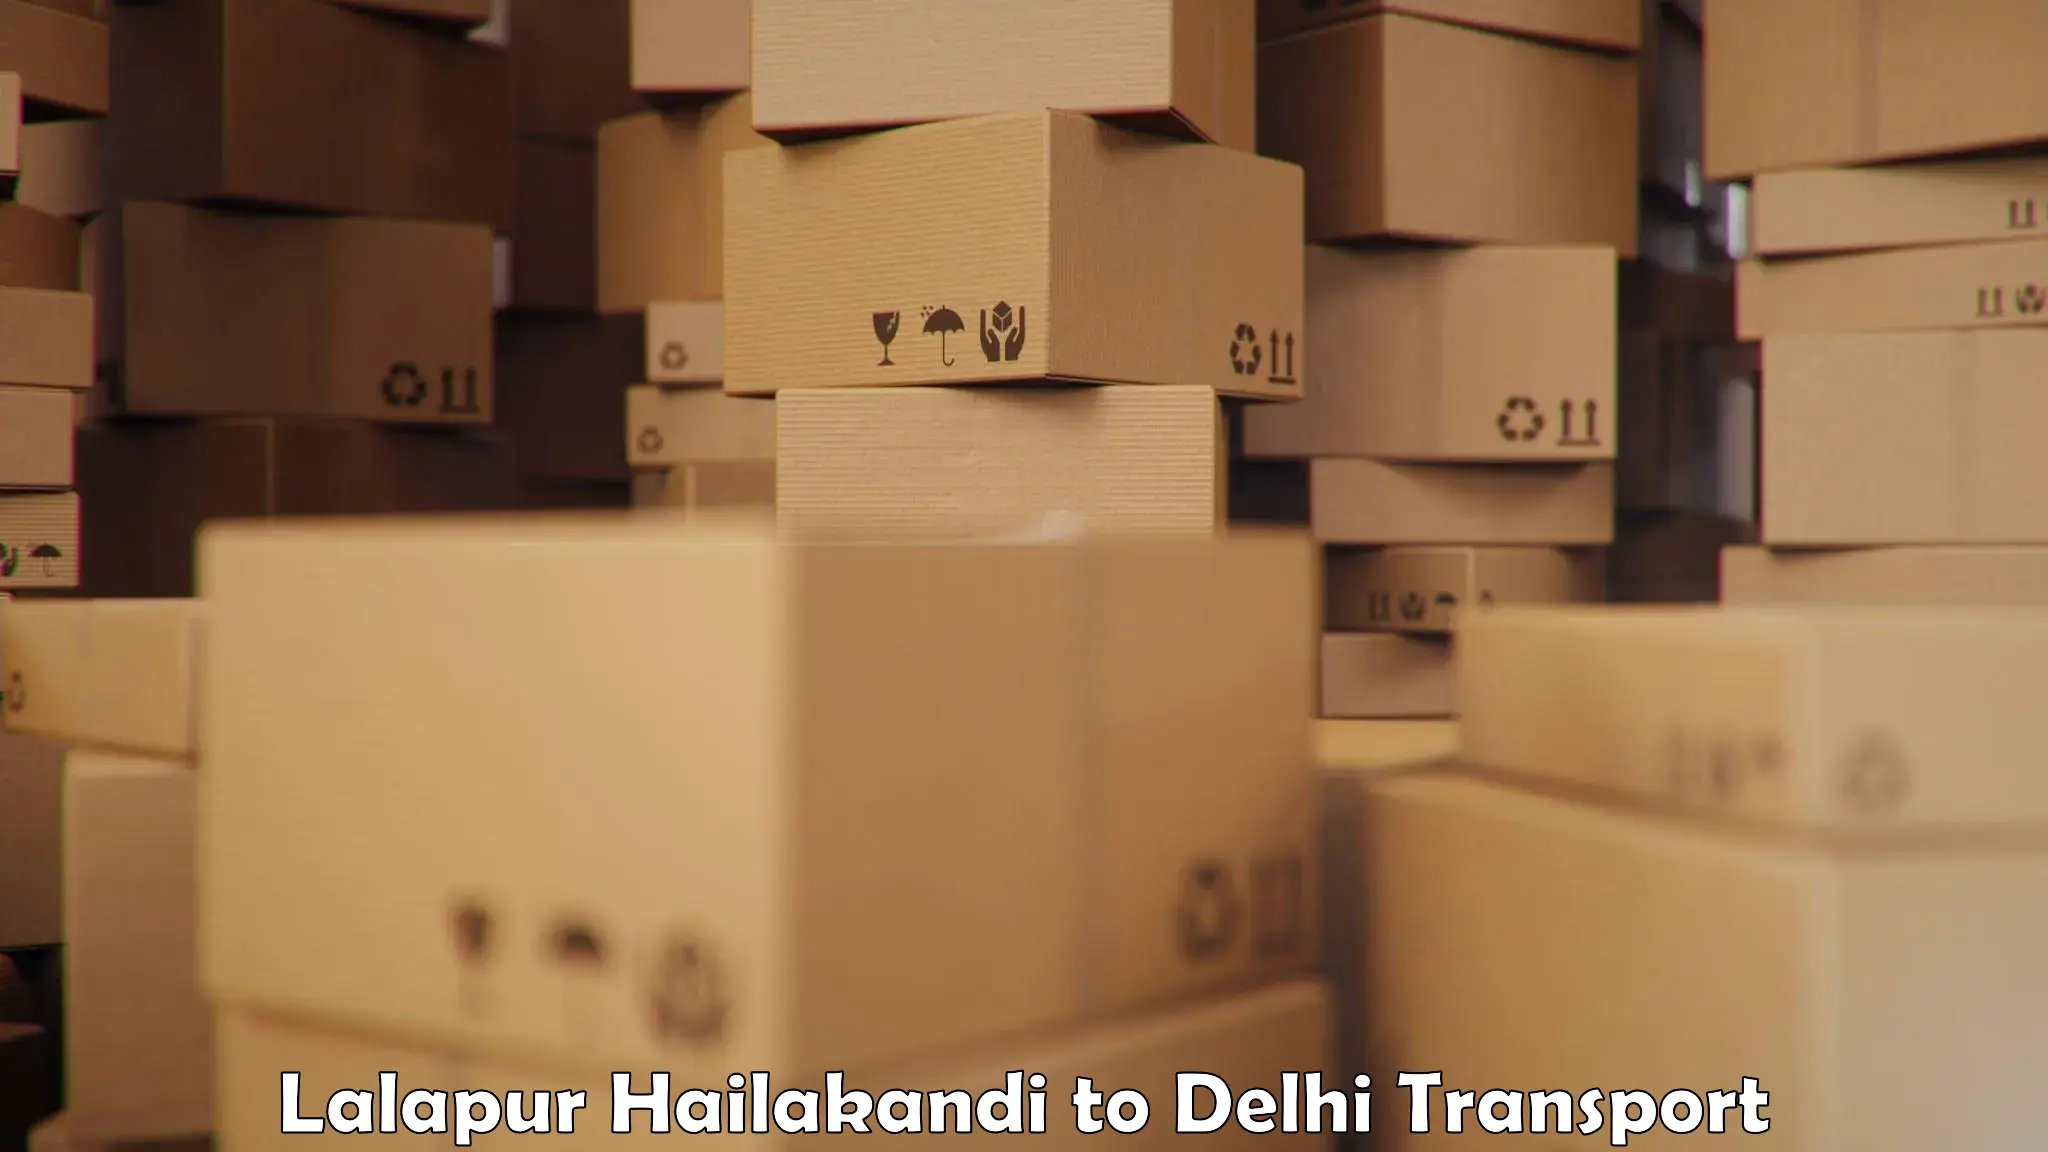 Container transport service Lalapur Hailakandi to NCR